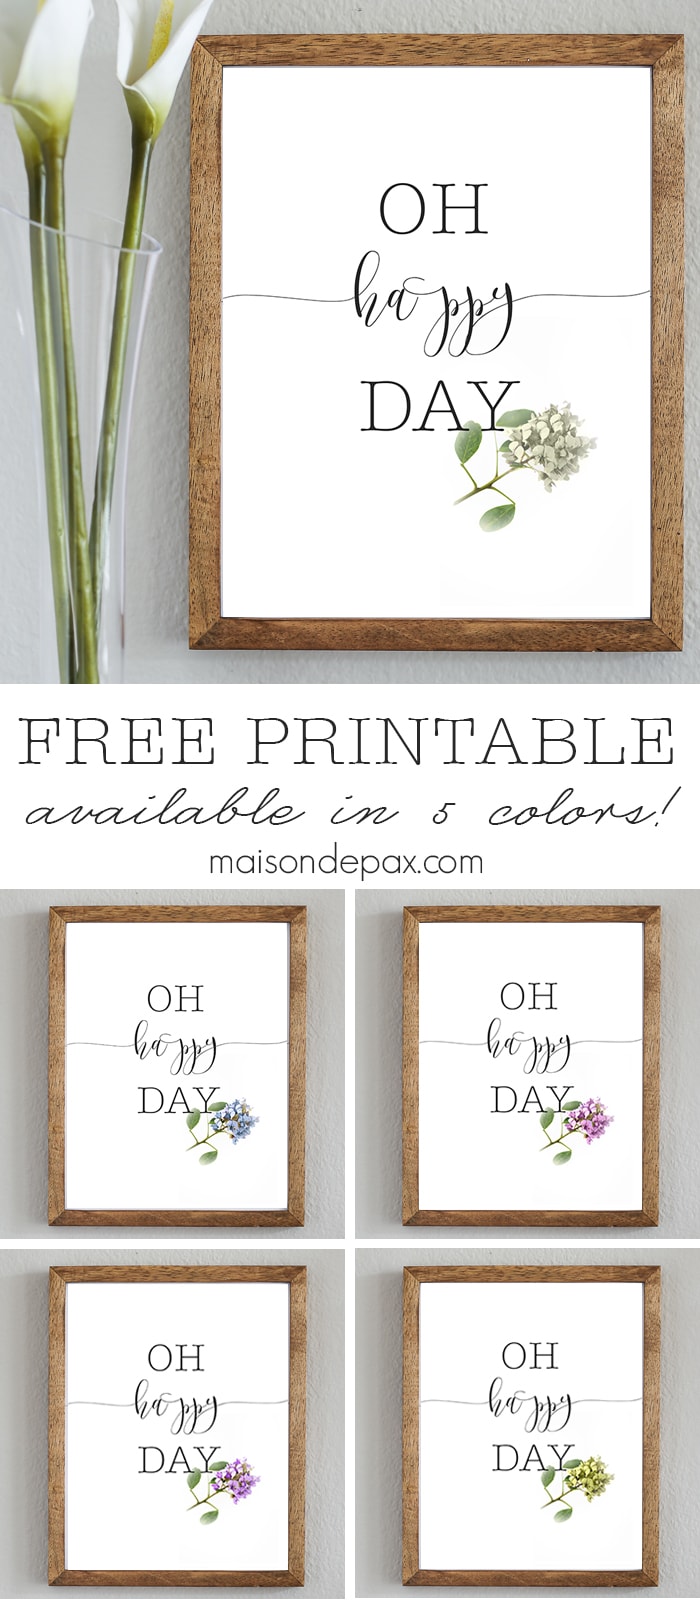 Oh Happy Day | Free spring printable available in 5 colors from maisondepax.com